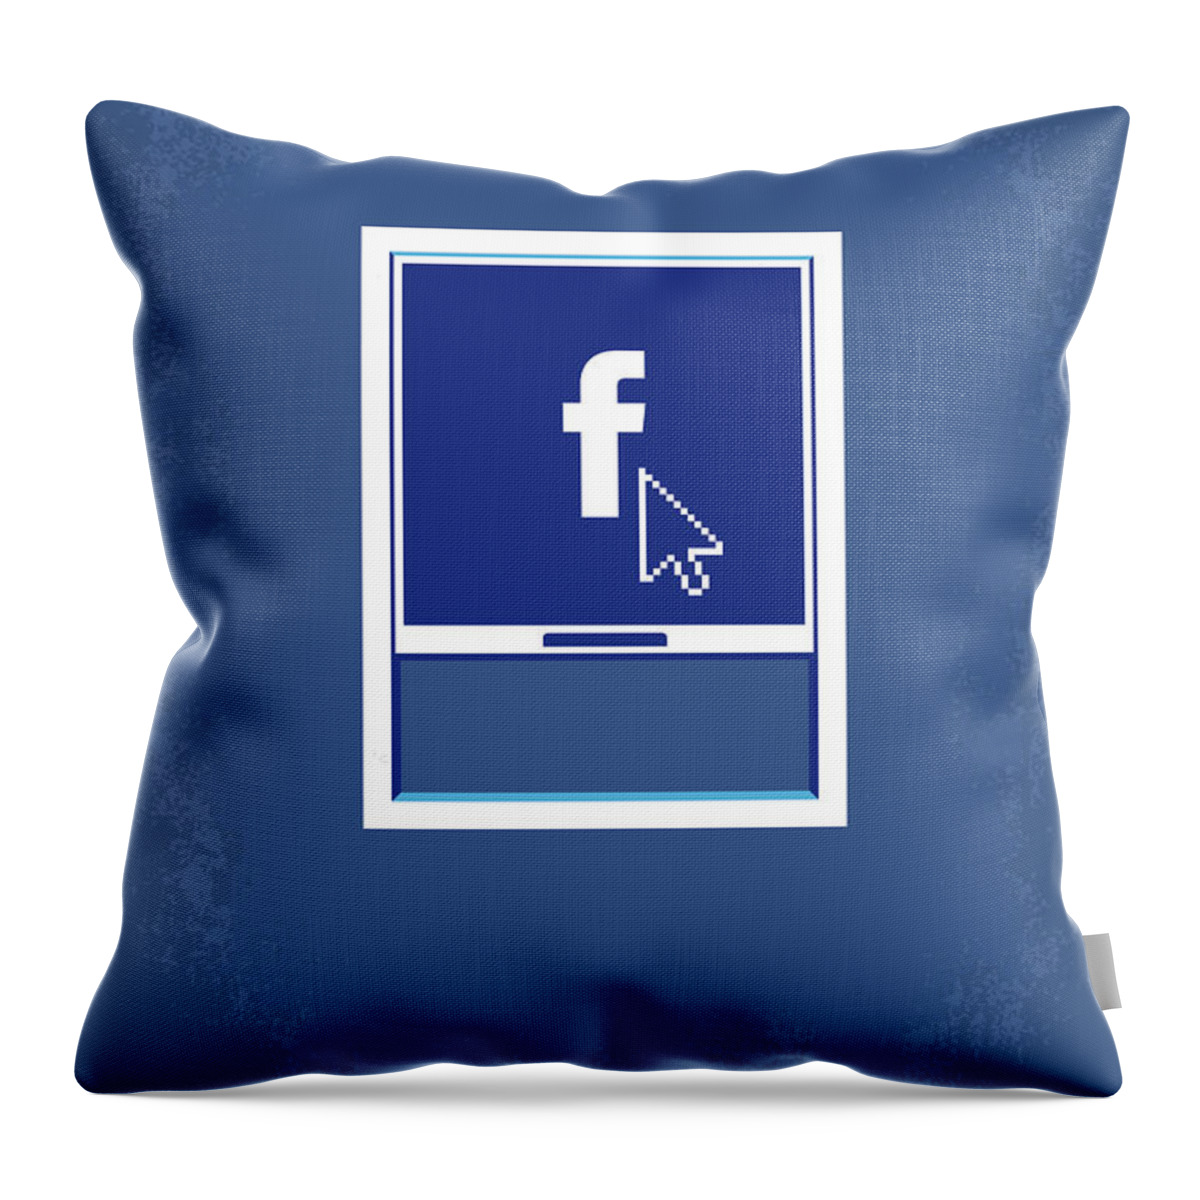 The Social Network Throw Pillow featuring the digital art No779 My The Social Network minimal movie poster by Chungkong Art